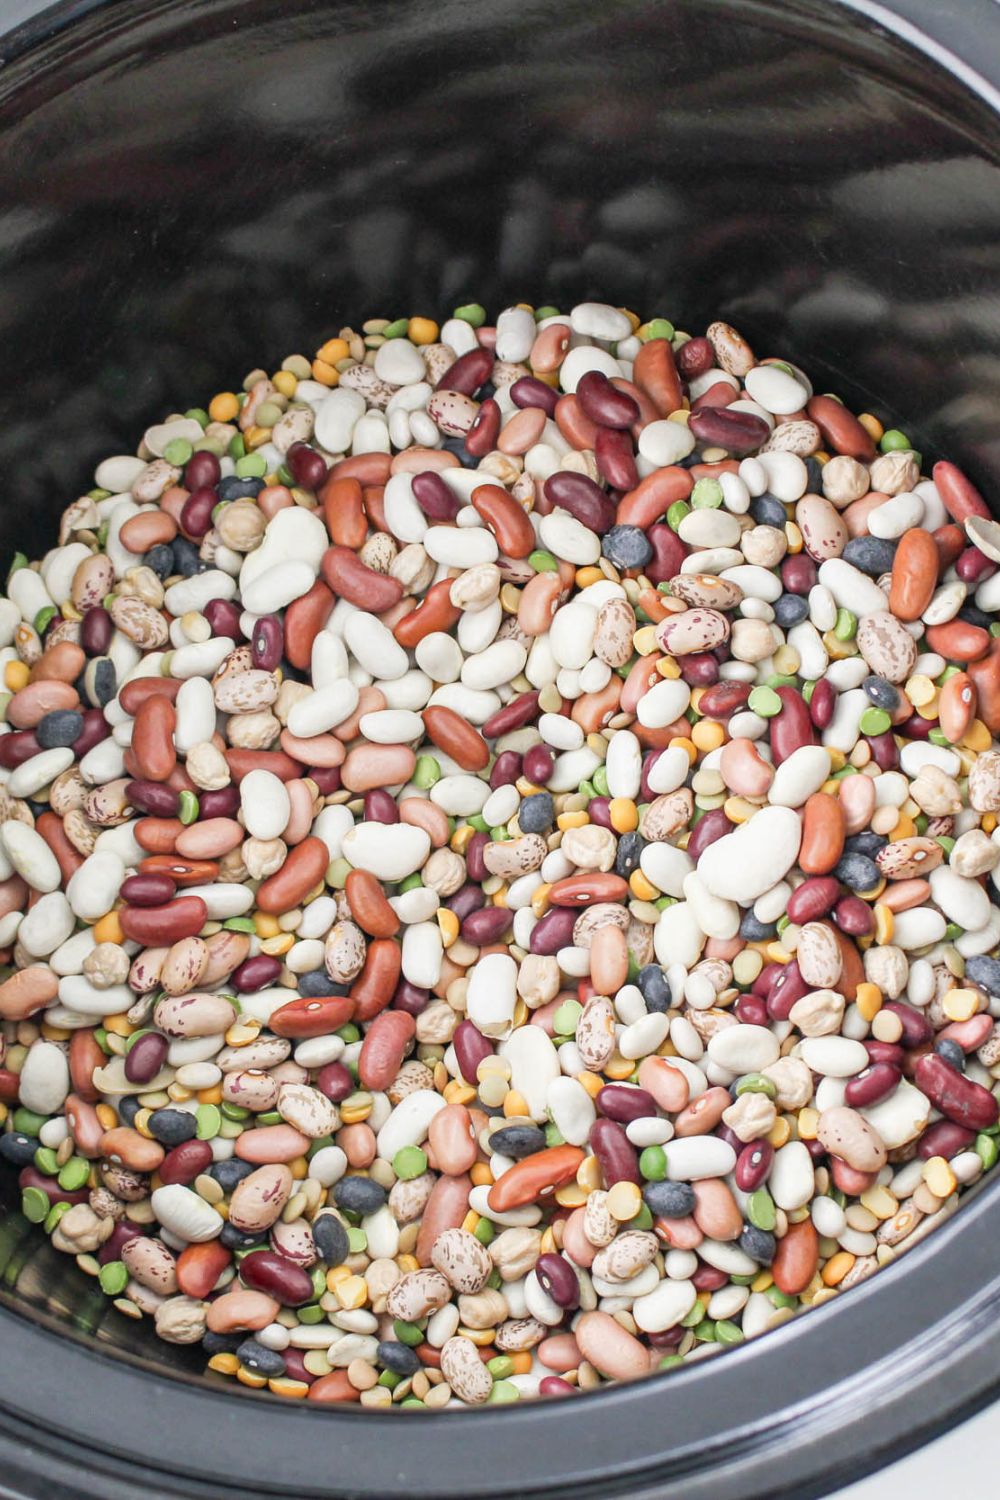 15 bean soup mix in a slow cooker on table